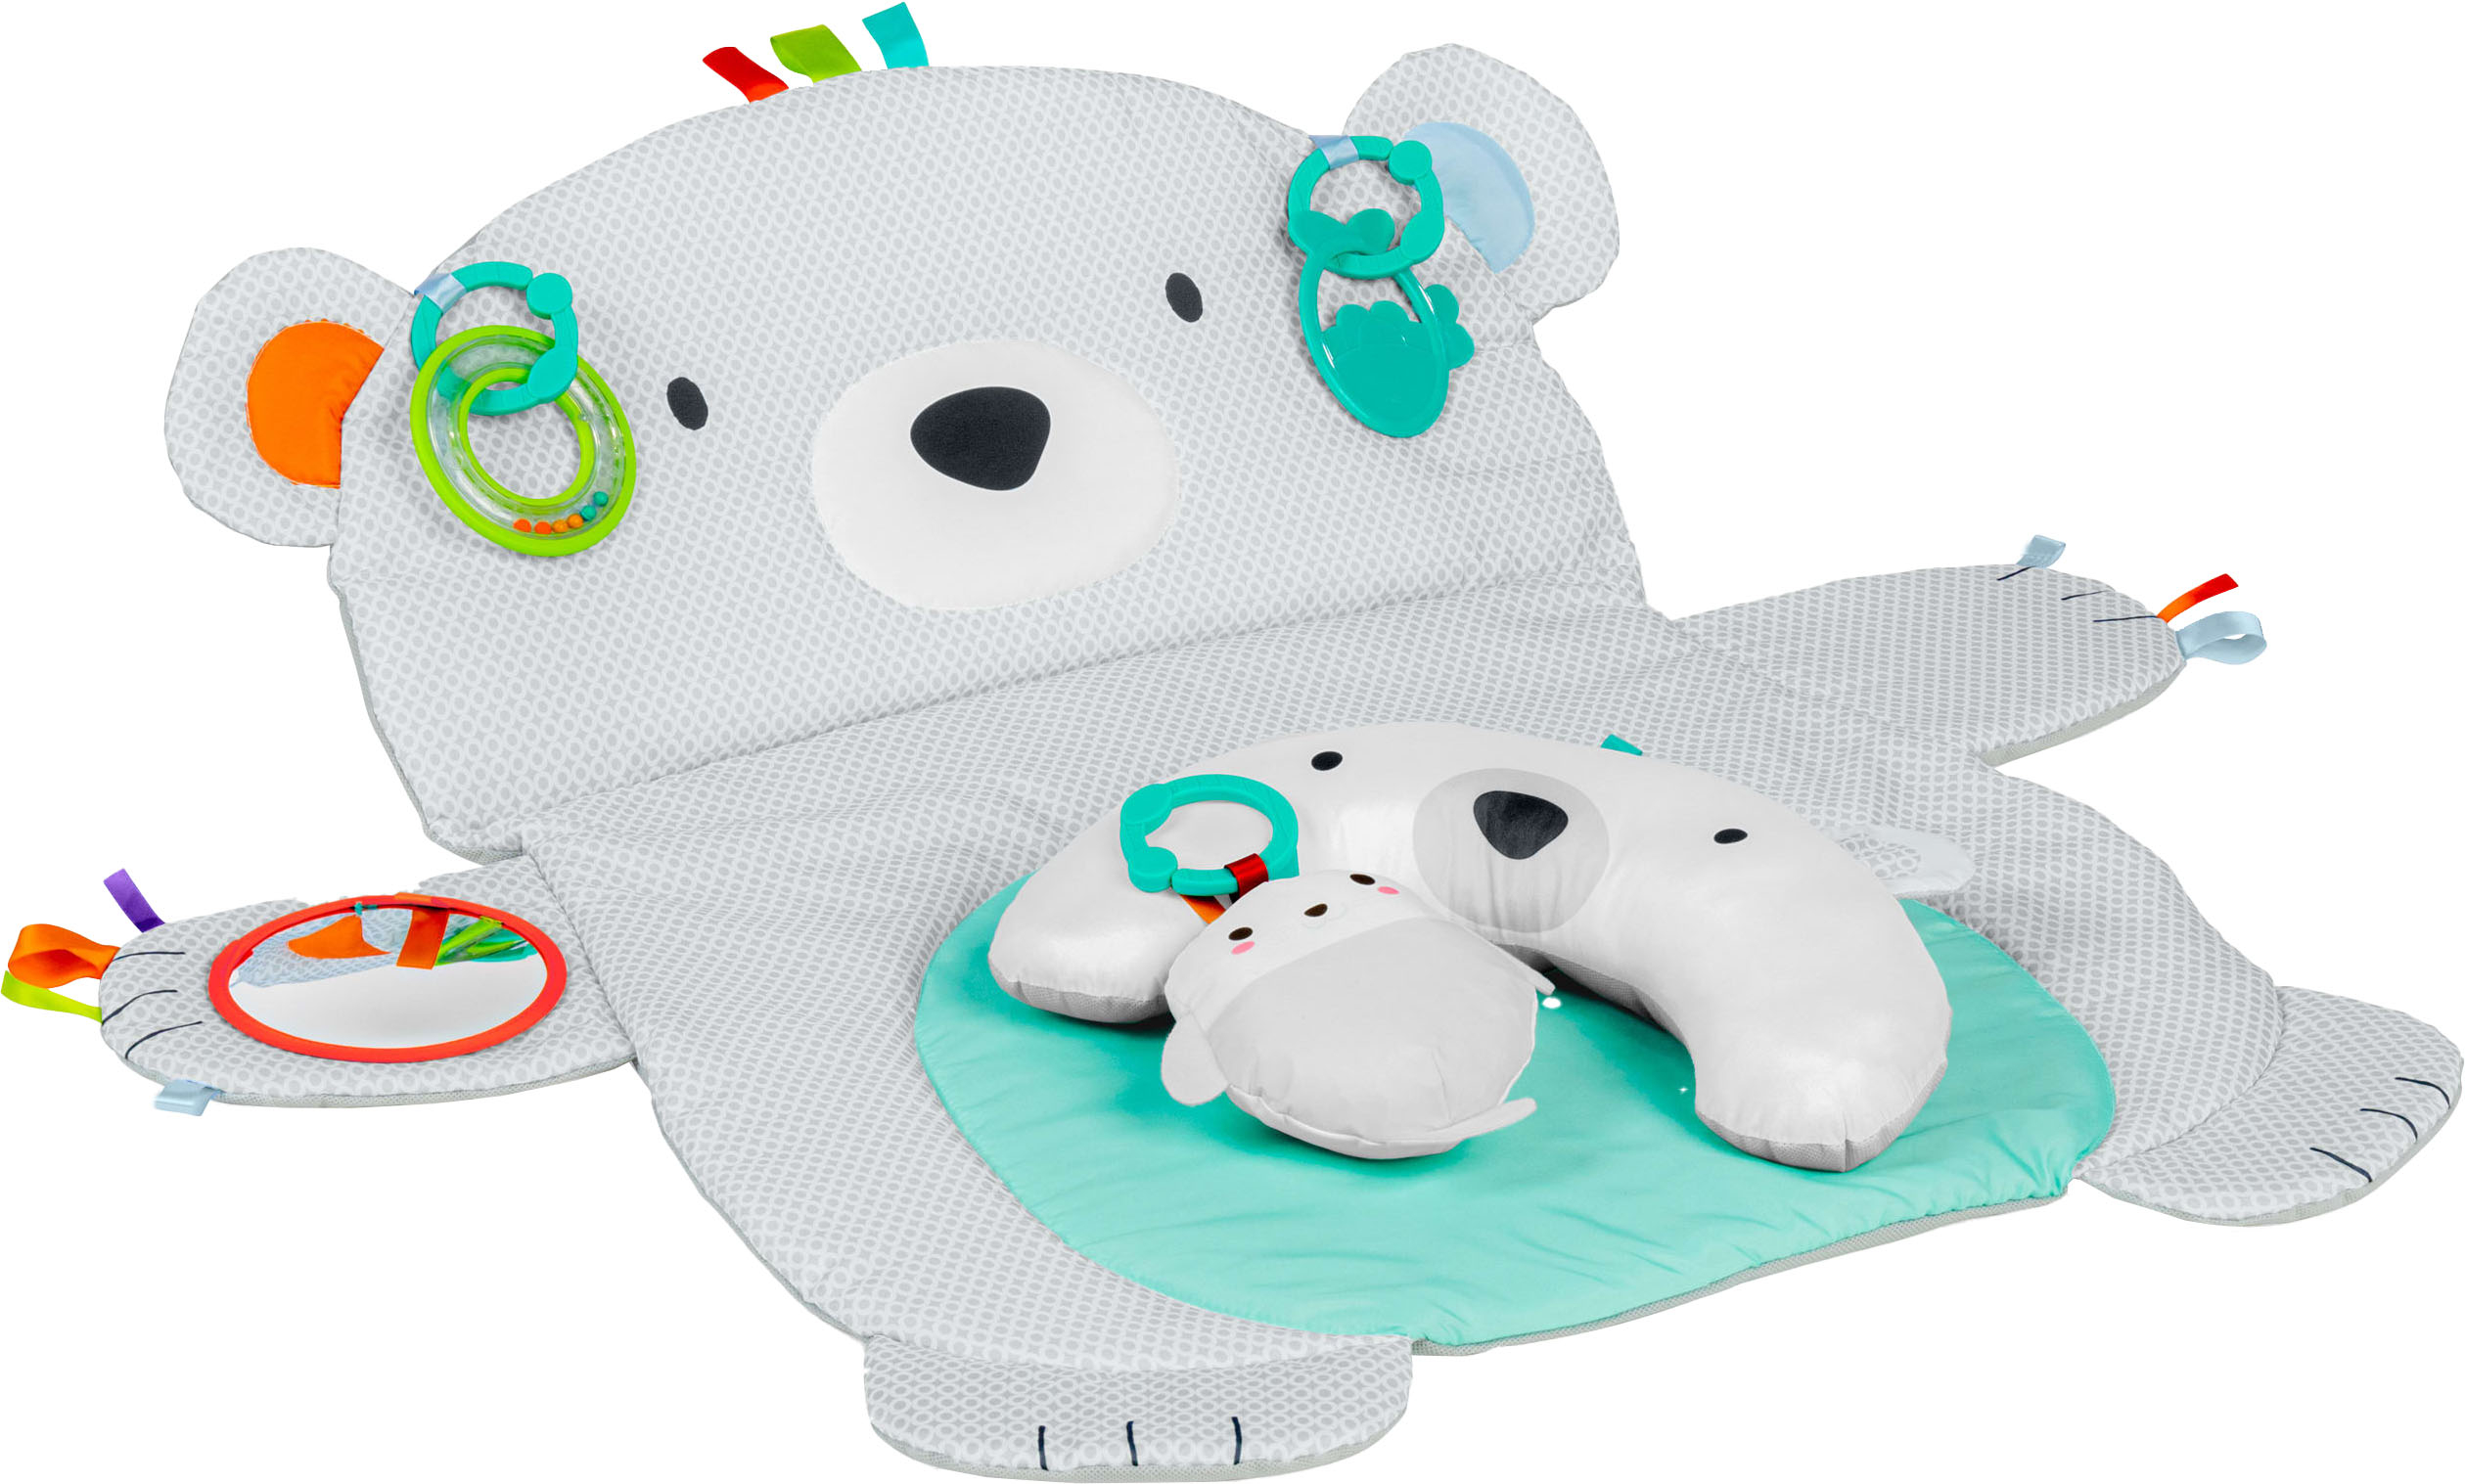 Baby Einstein Sea Dreams Soother Crib Toy Multi 11058-1-EP-W11